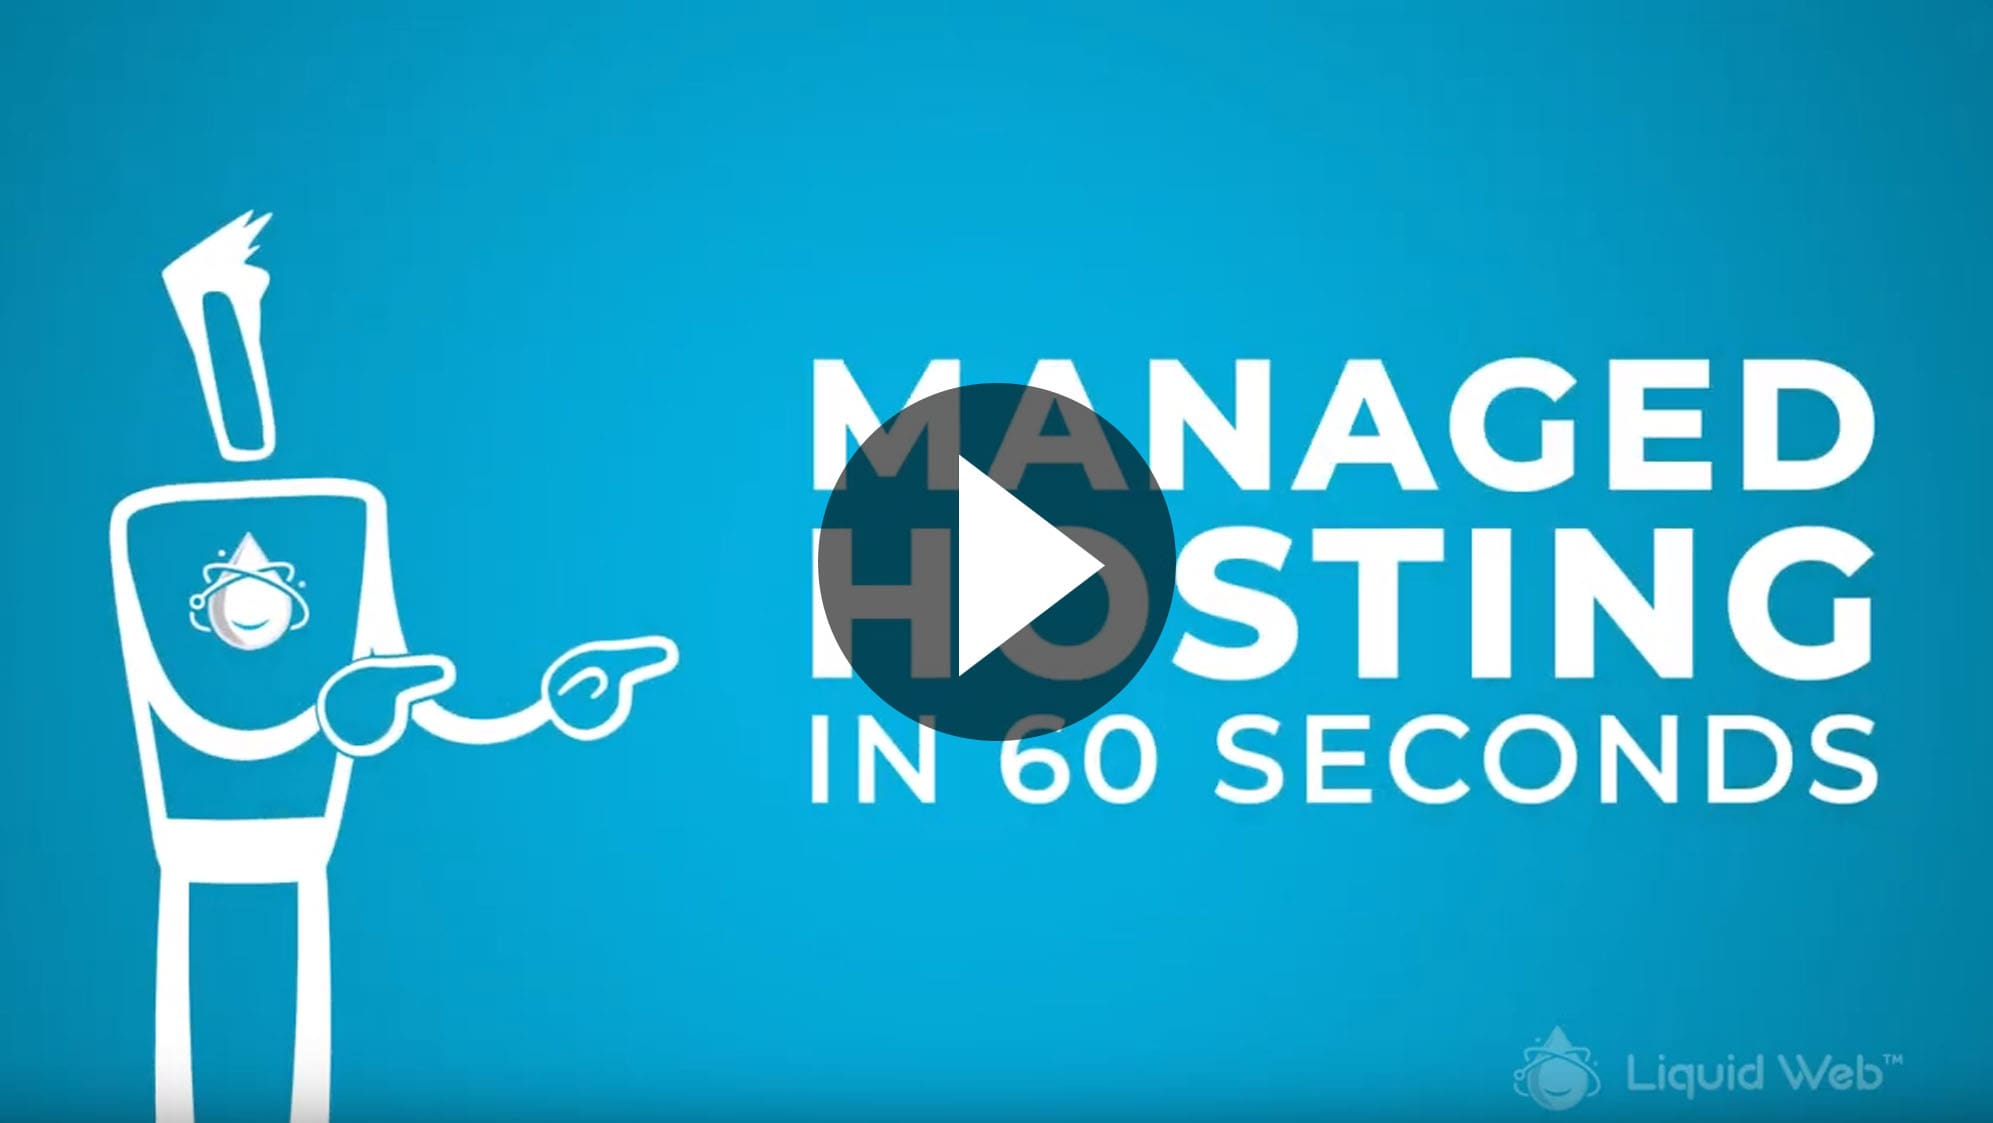 Managed Hosting in 60 Seconds